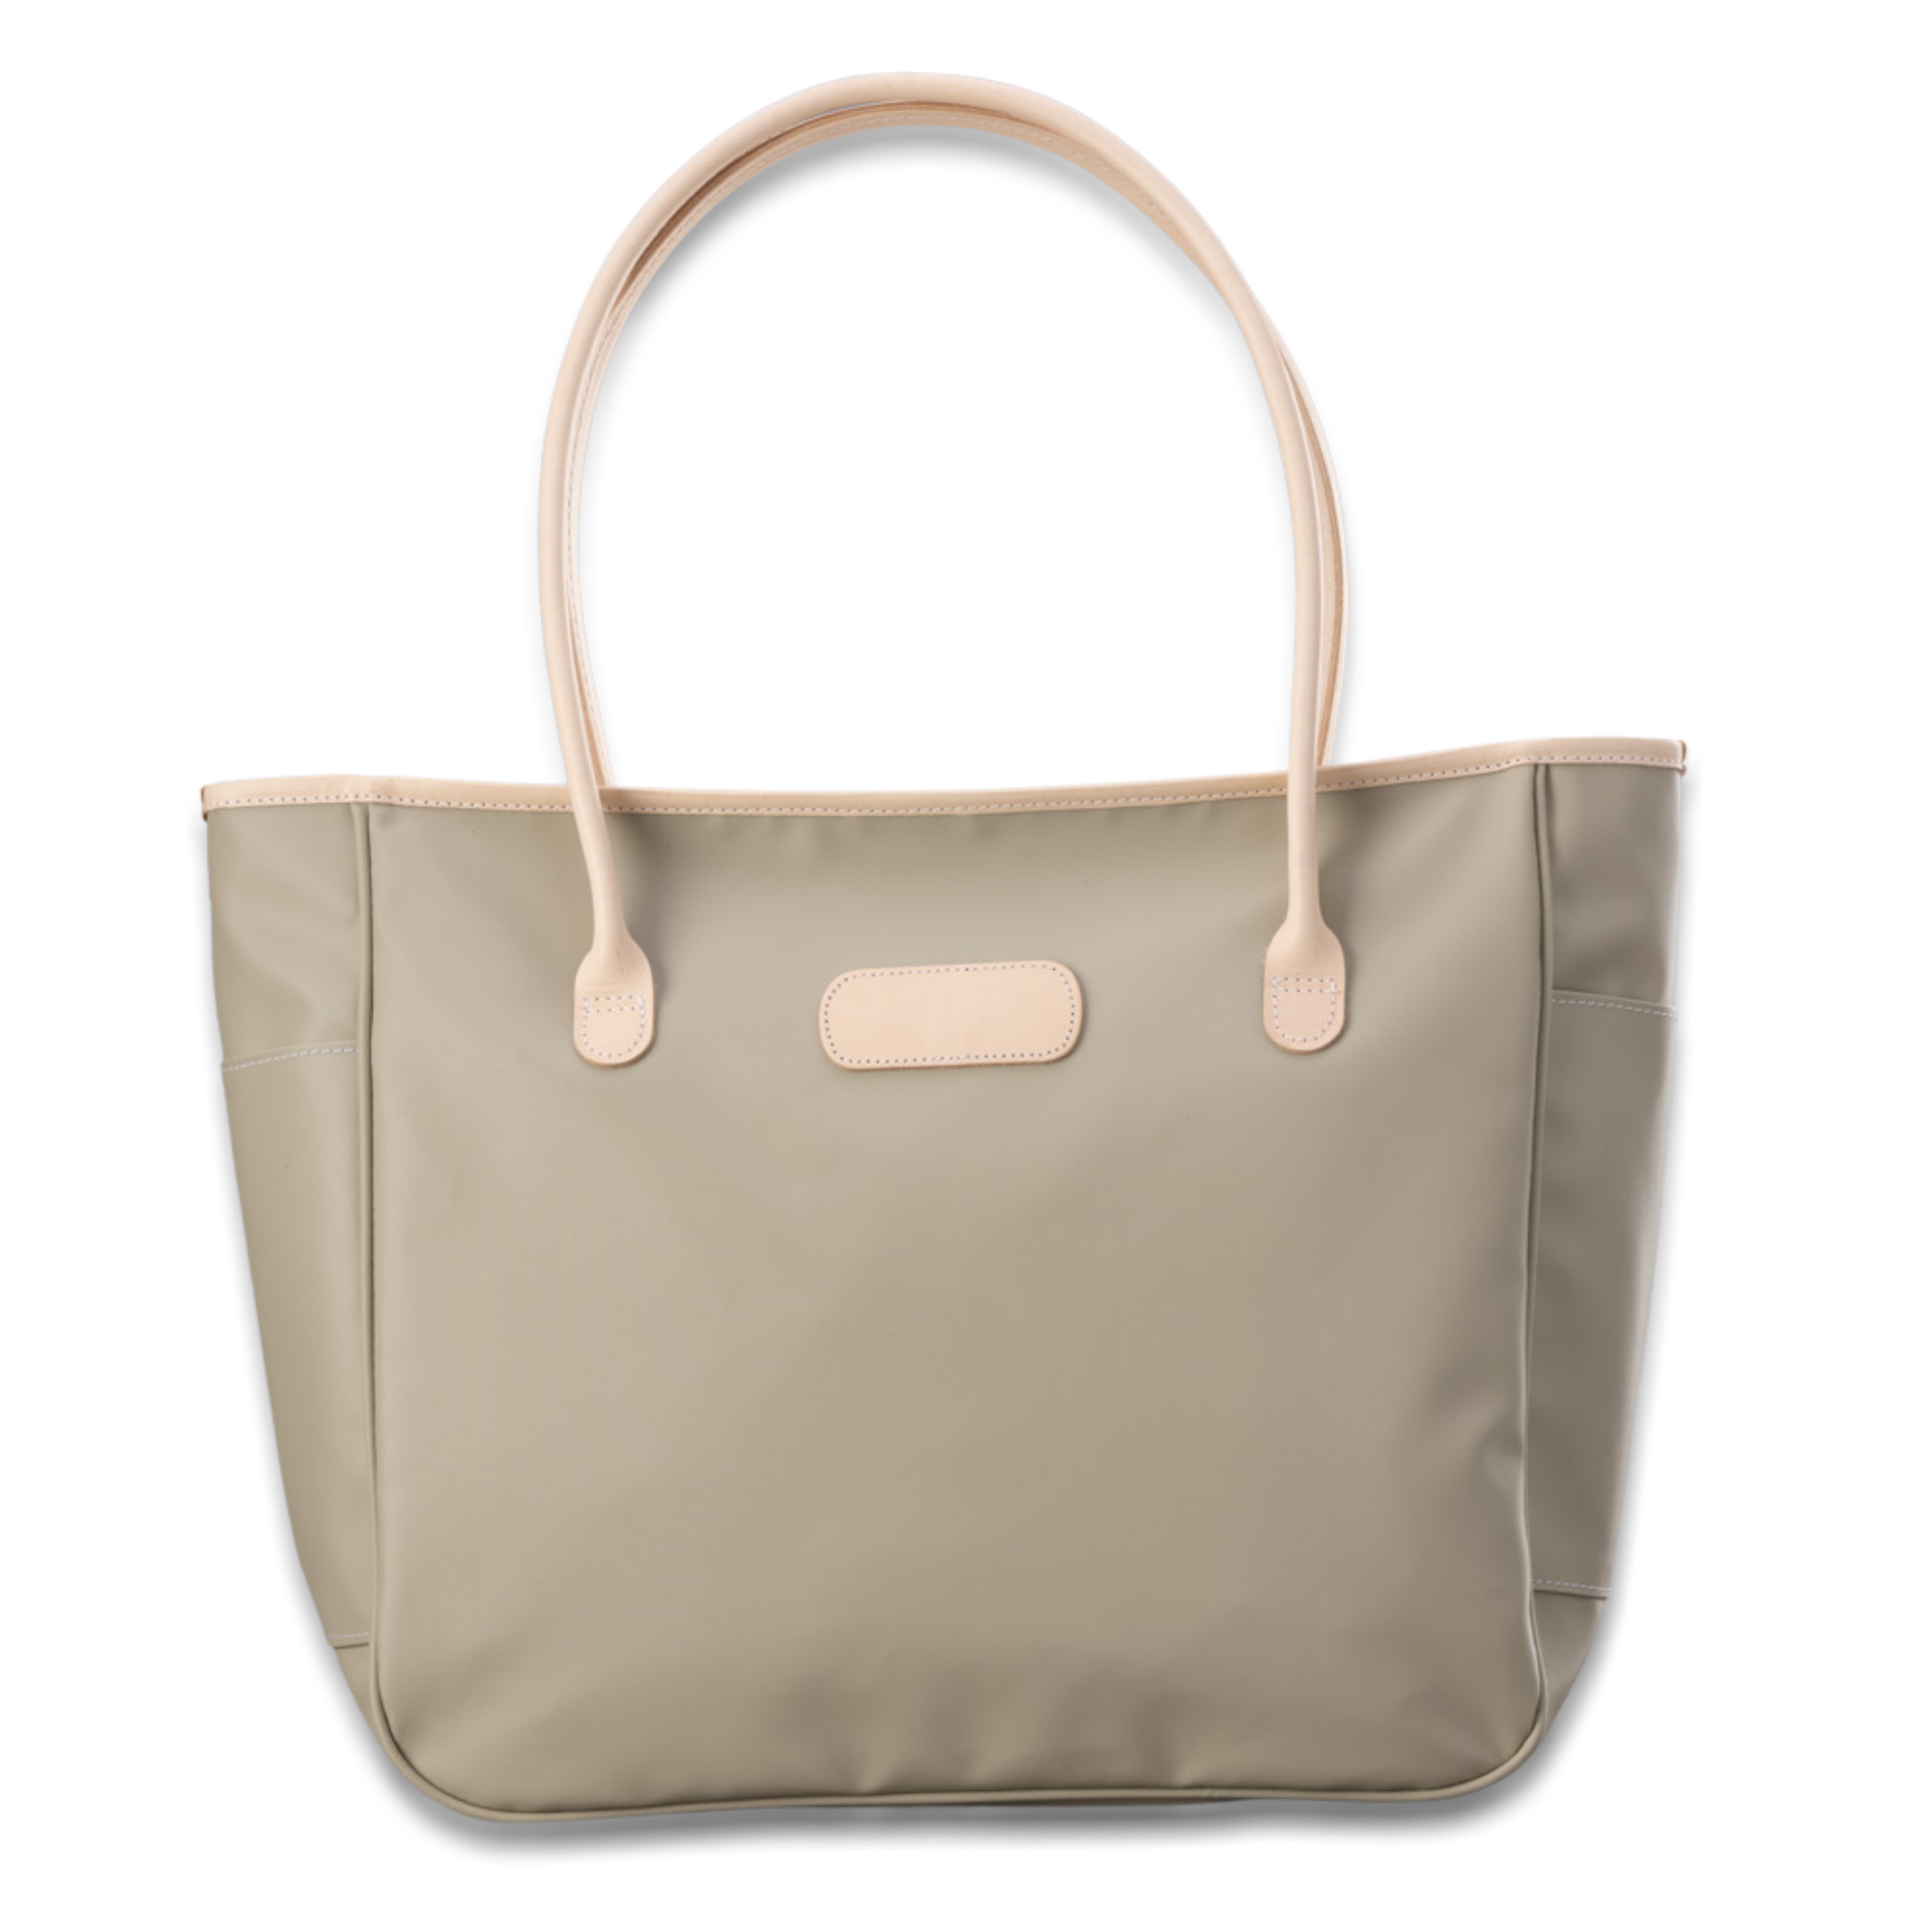 Quality made in America durable coated canvas large shoulder tote bag with natural leather patch to personalize with initials or monogram